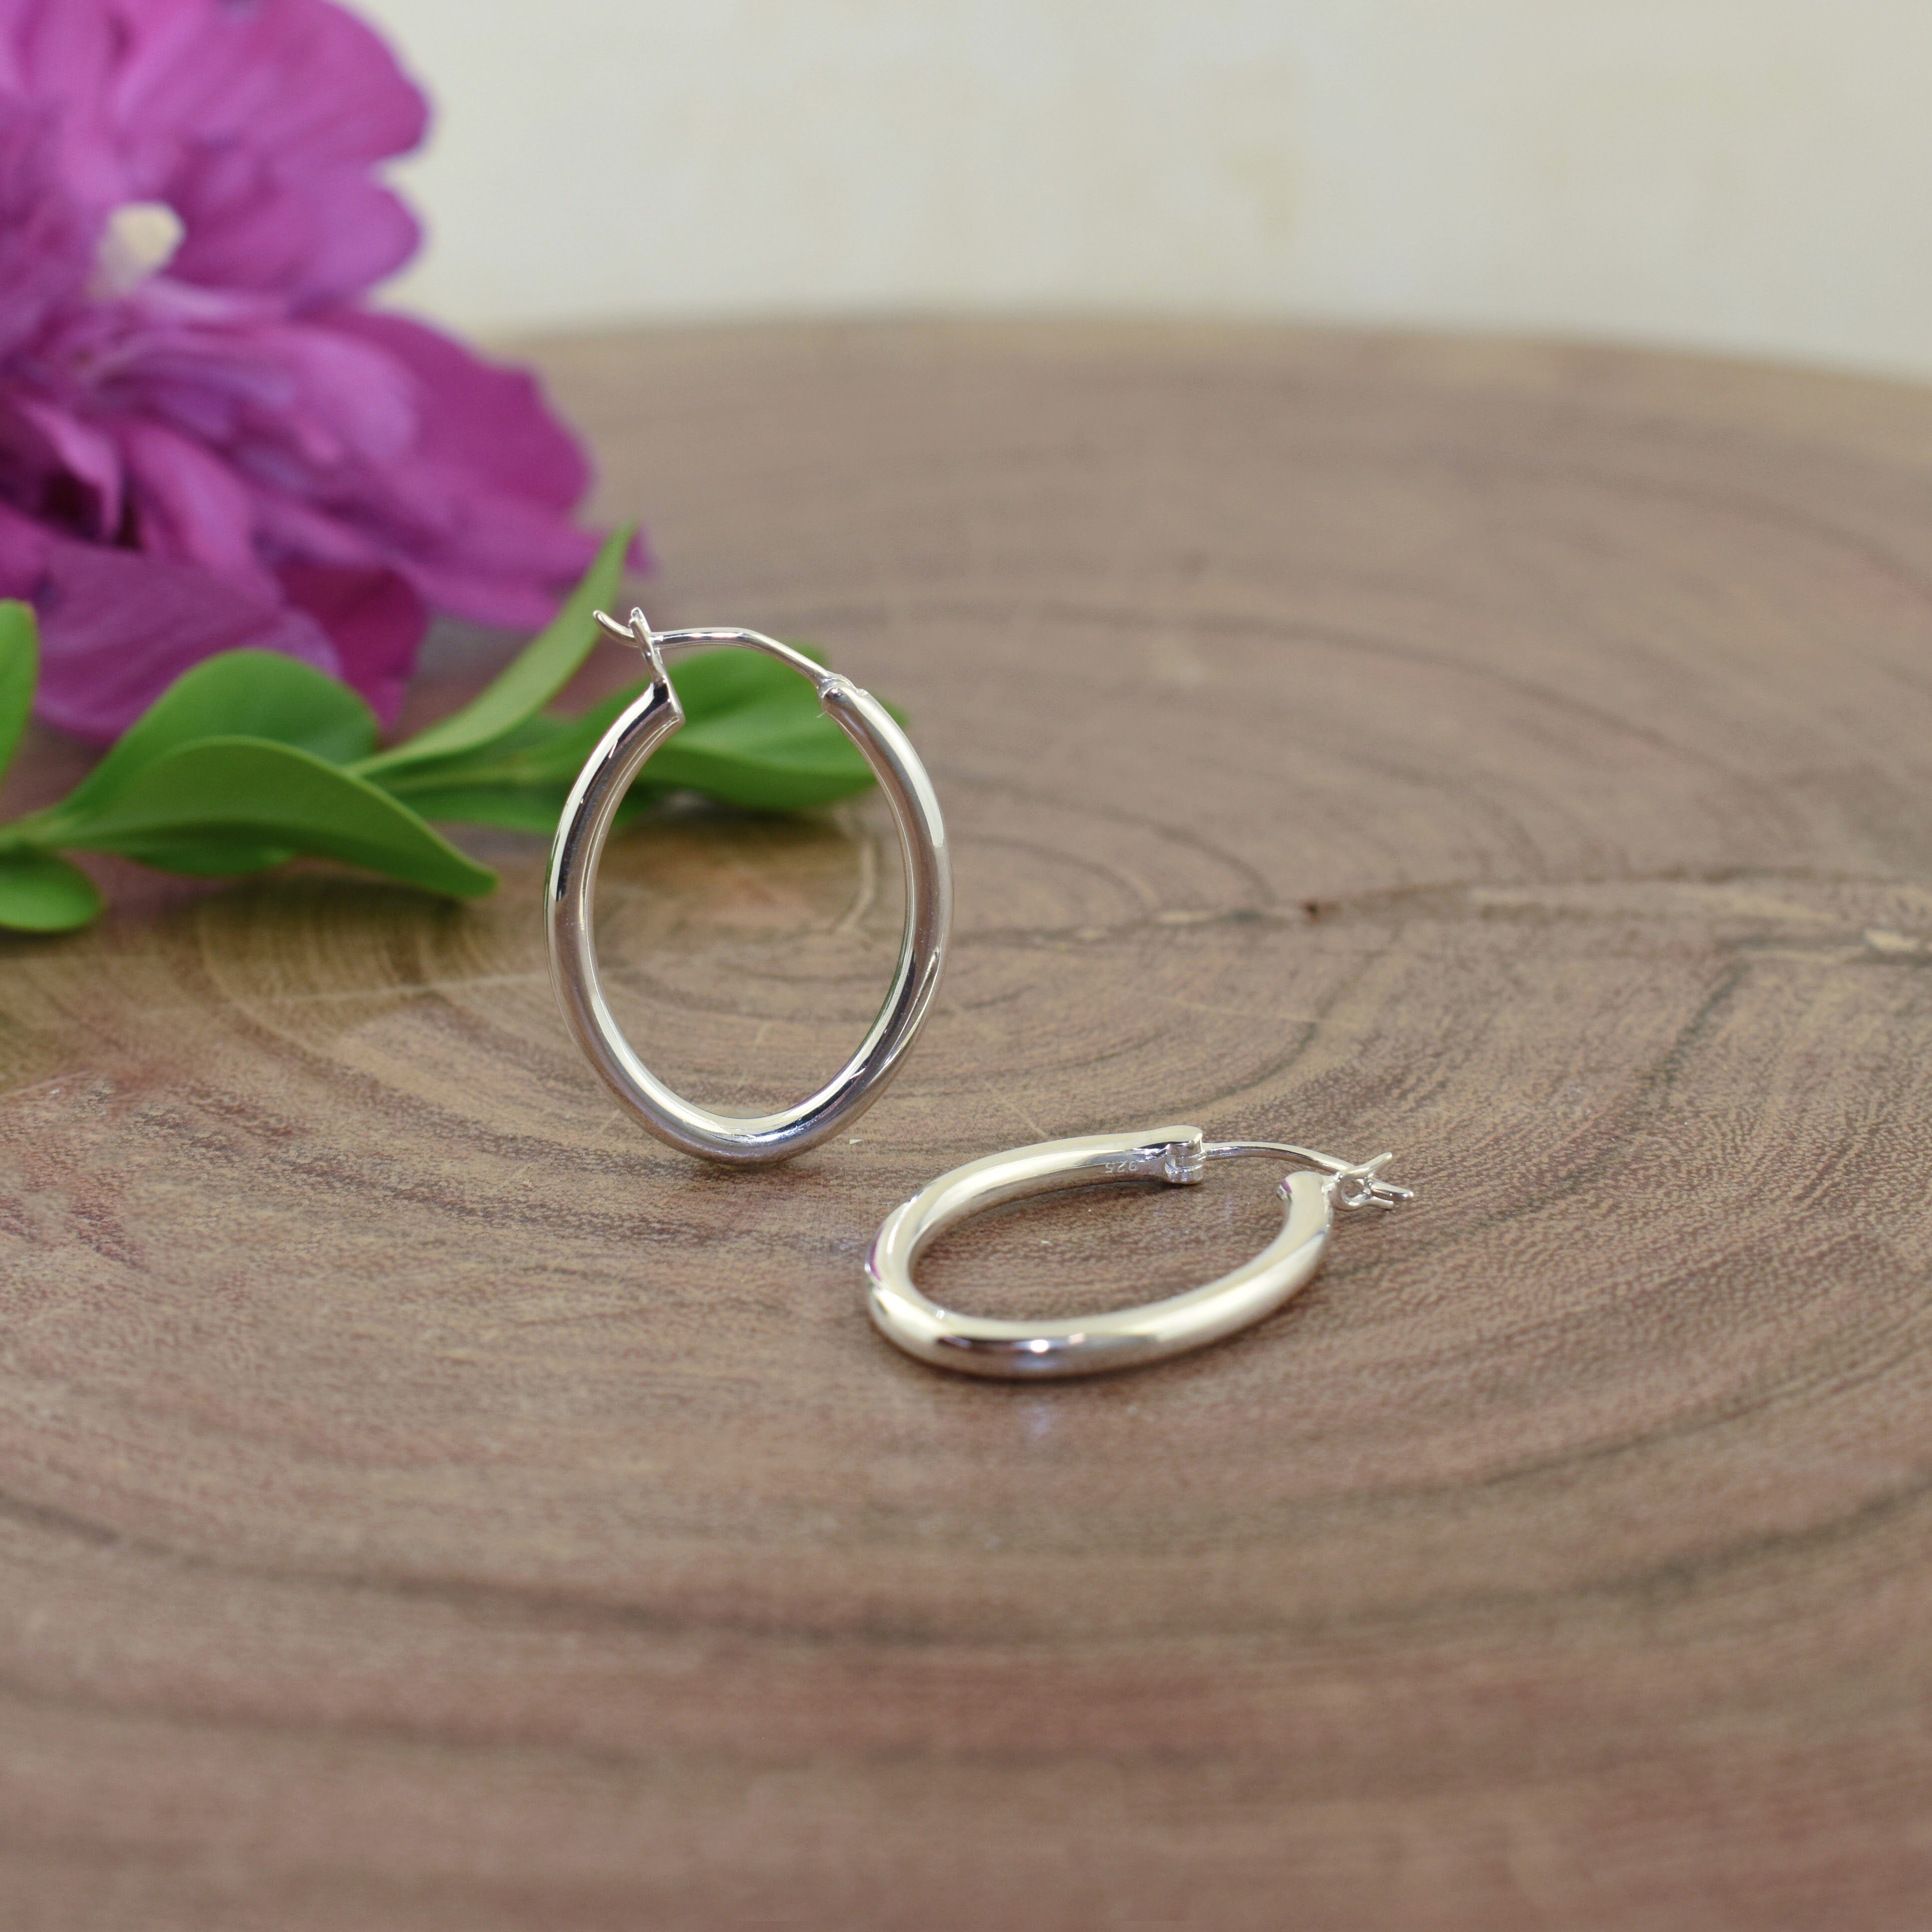 Oval v-snap earrings in high polished sterling silver